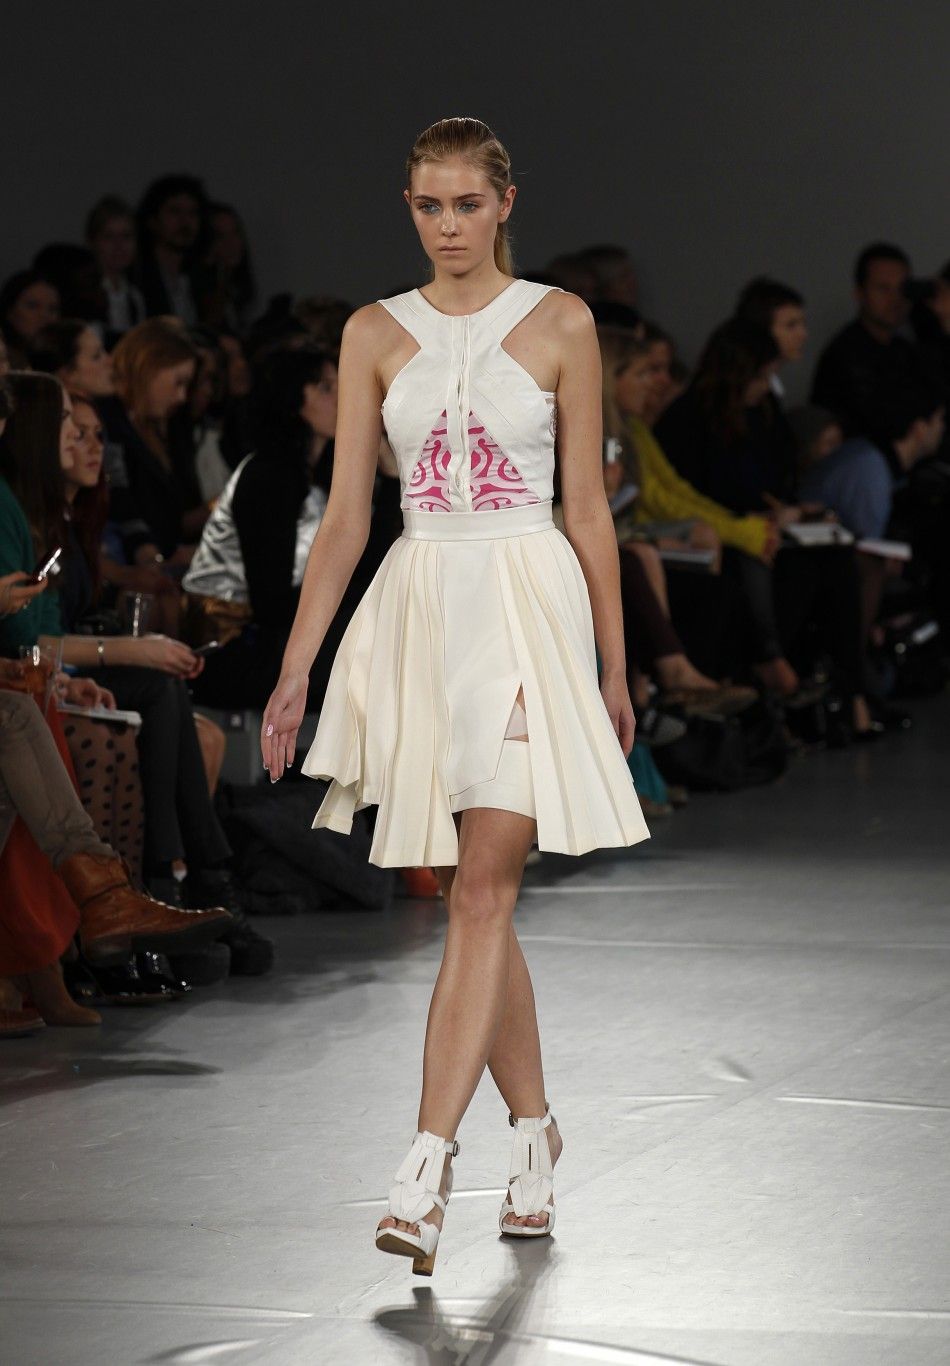 A model presents a creation from the David Koma 2012 SpringSummer collection during London Fashion Week